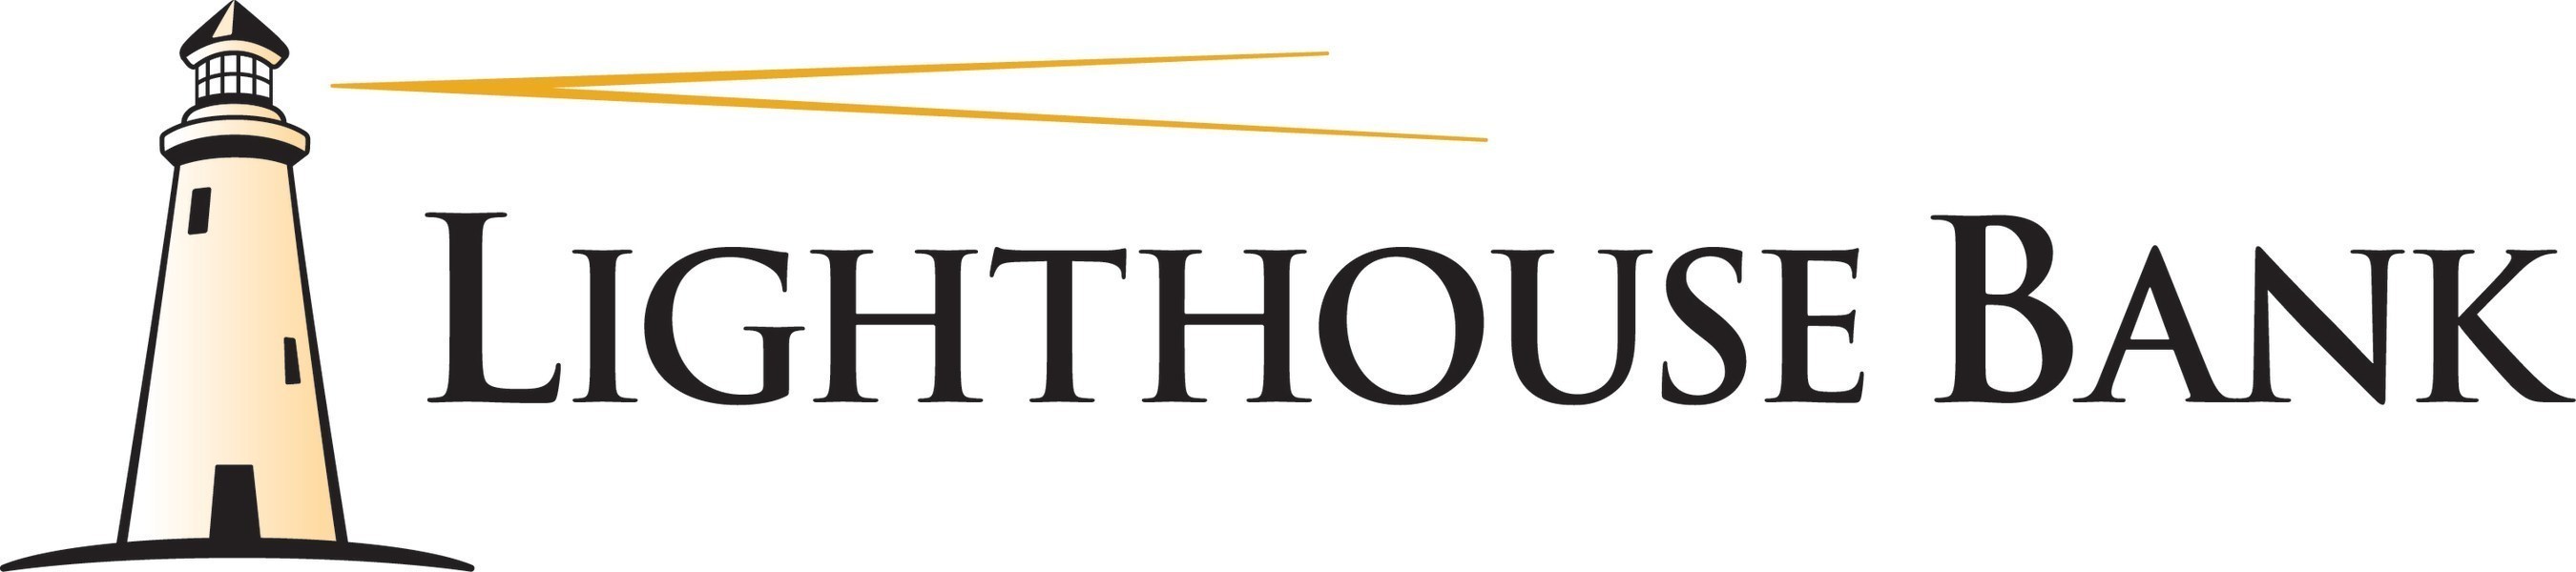 Lighthouse Bank Reports Record Earnings for 2018